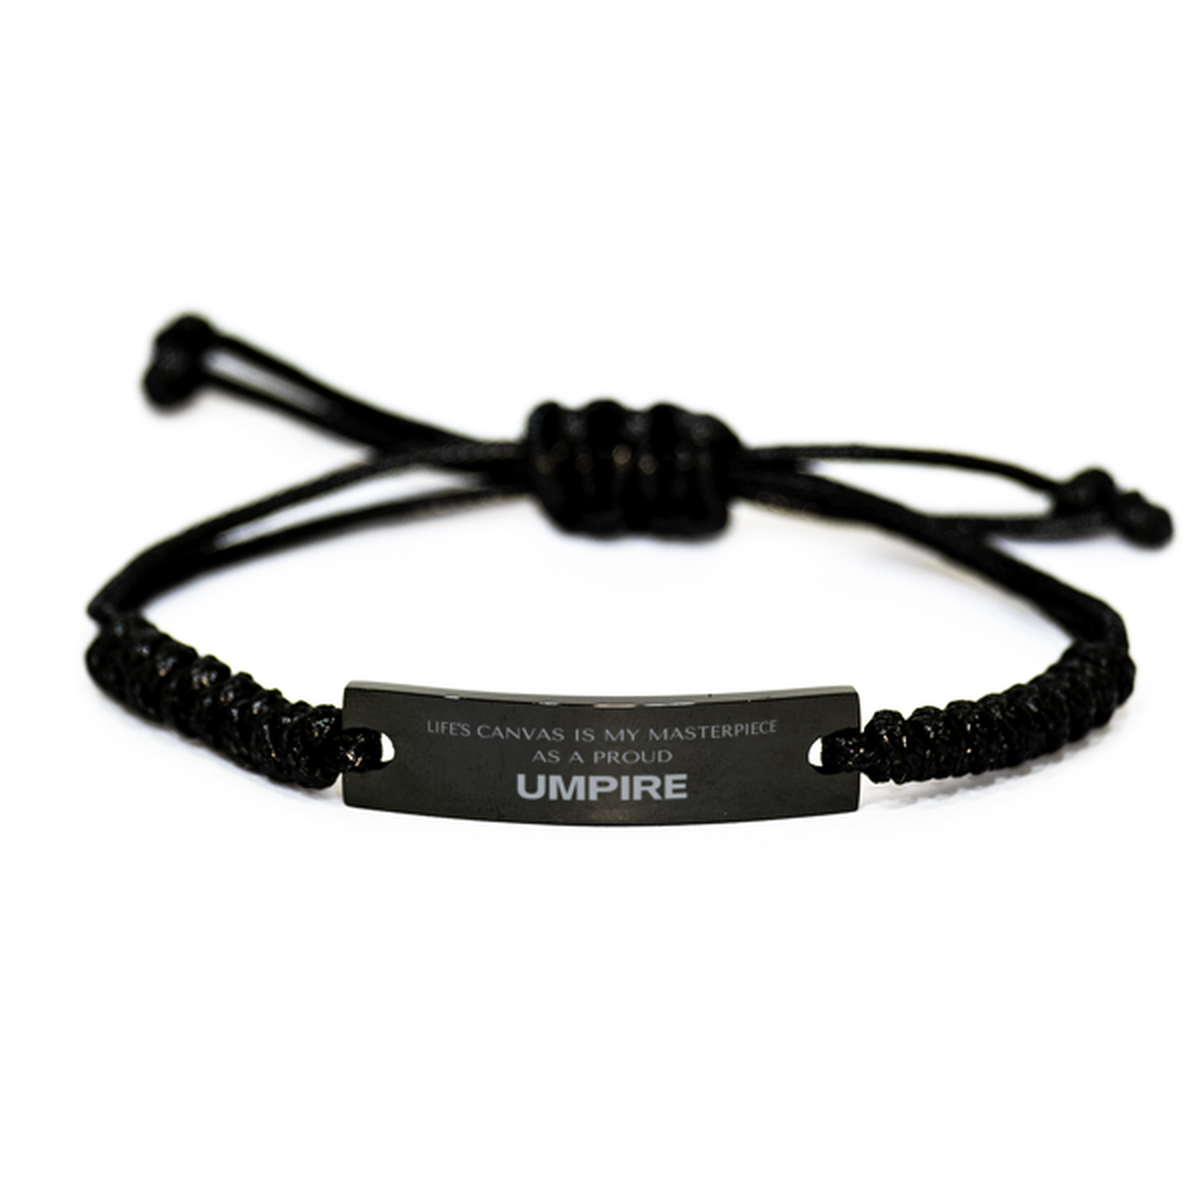 Proud Umpire Gifts, Life's canvas is my masterpiece, Epic Birthday Christmas Unique Black Rope Bracelet For Umpire, Coworkers, Men, Women, Friends